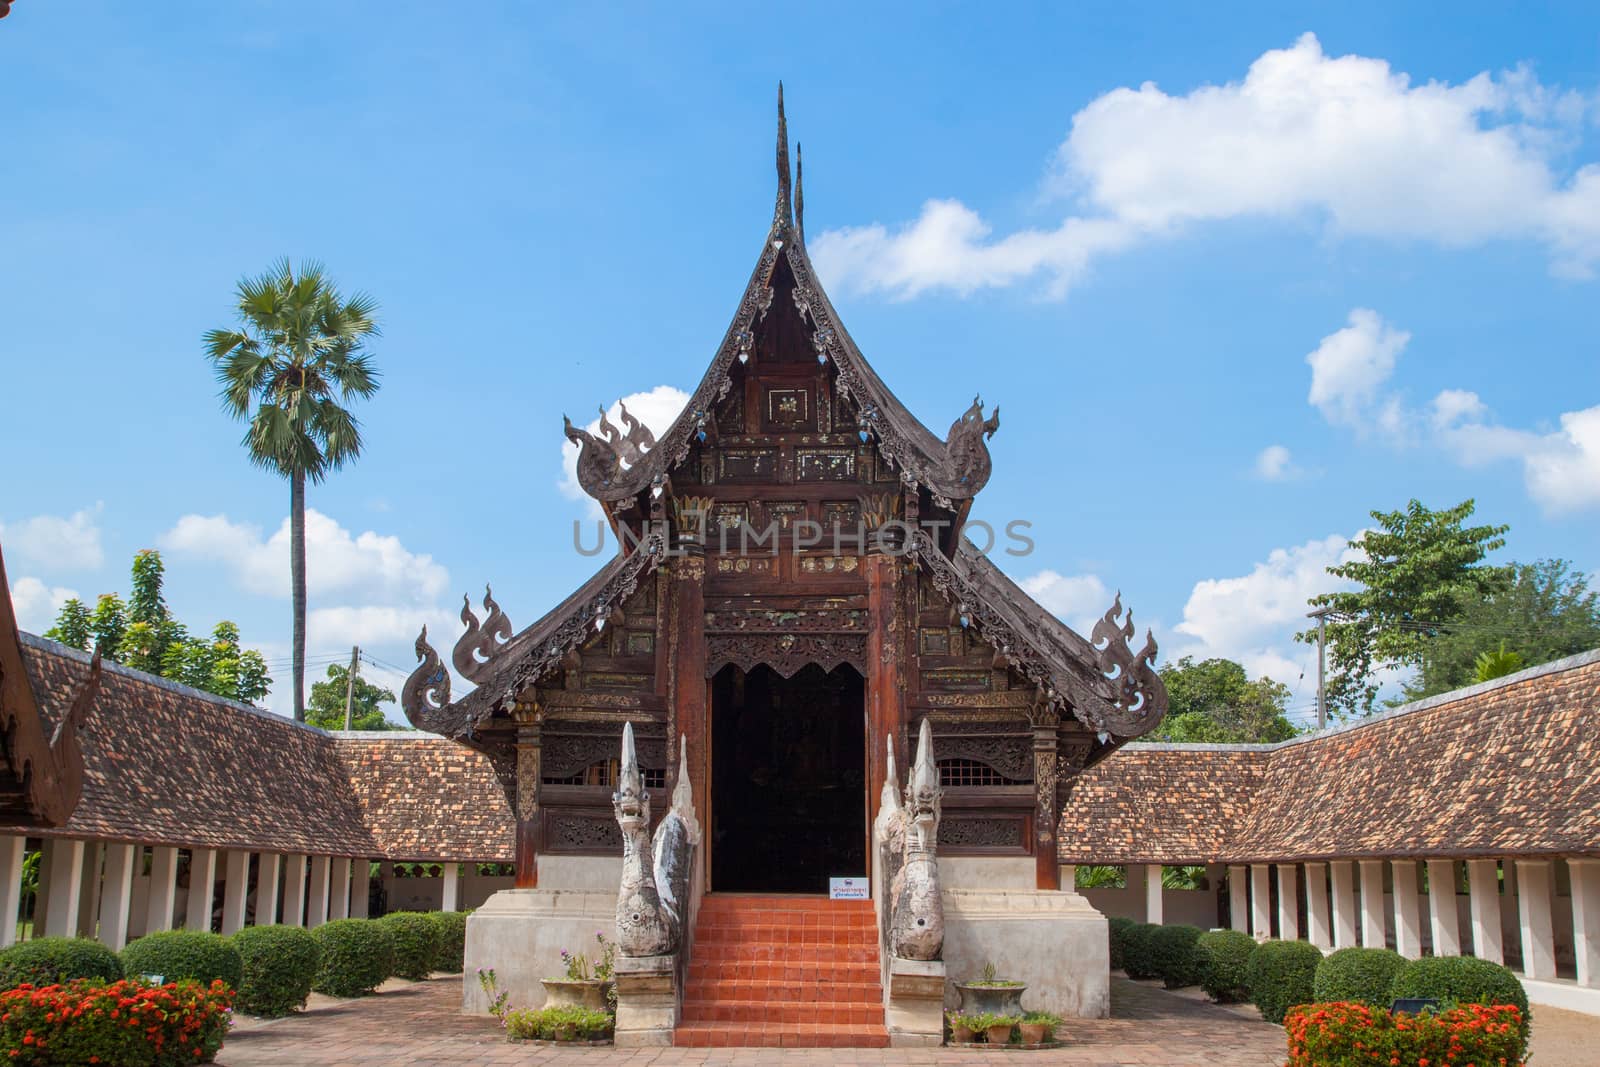 Wat Ton Kain 700 years or Inthrawat temple , popular famous tourist attraction landmark in Chiangmai. Old wooden Thai temple in Chiang Mai Thailand by asiandelight